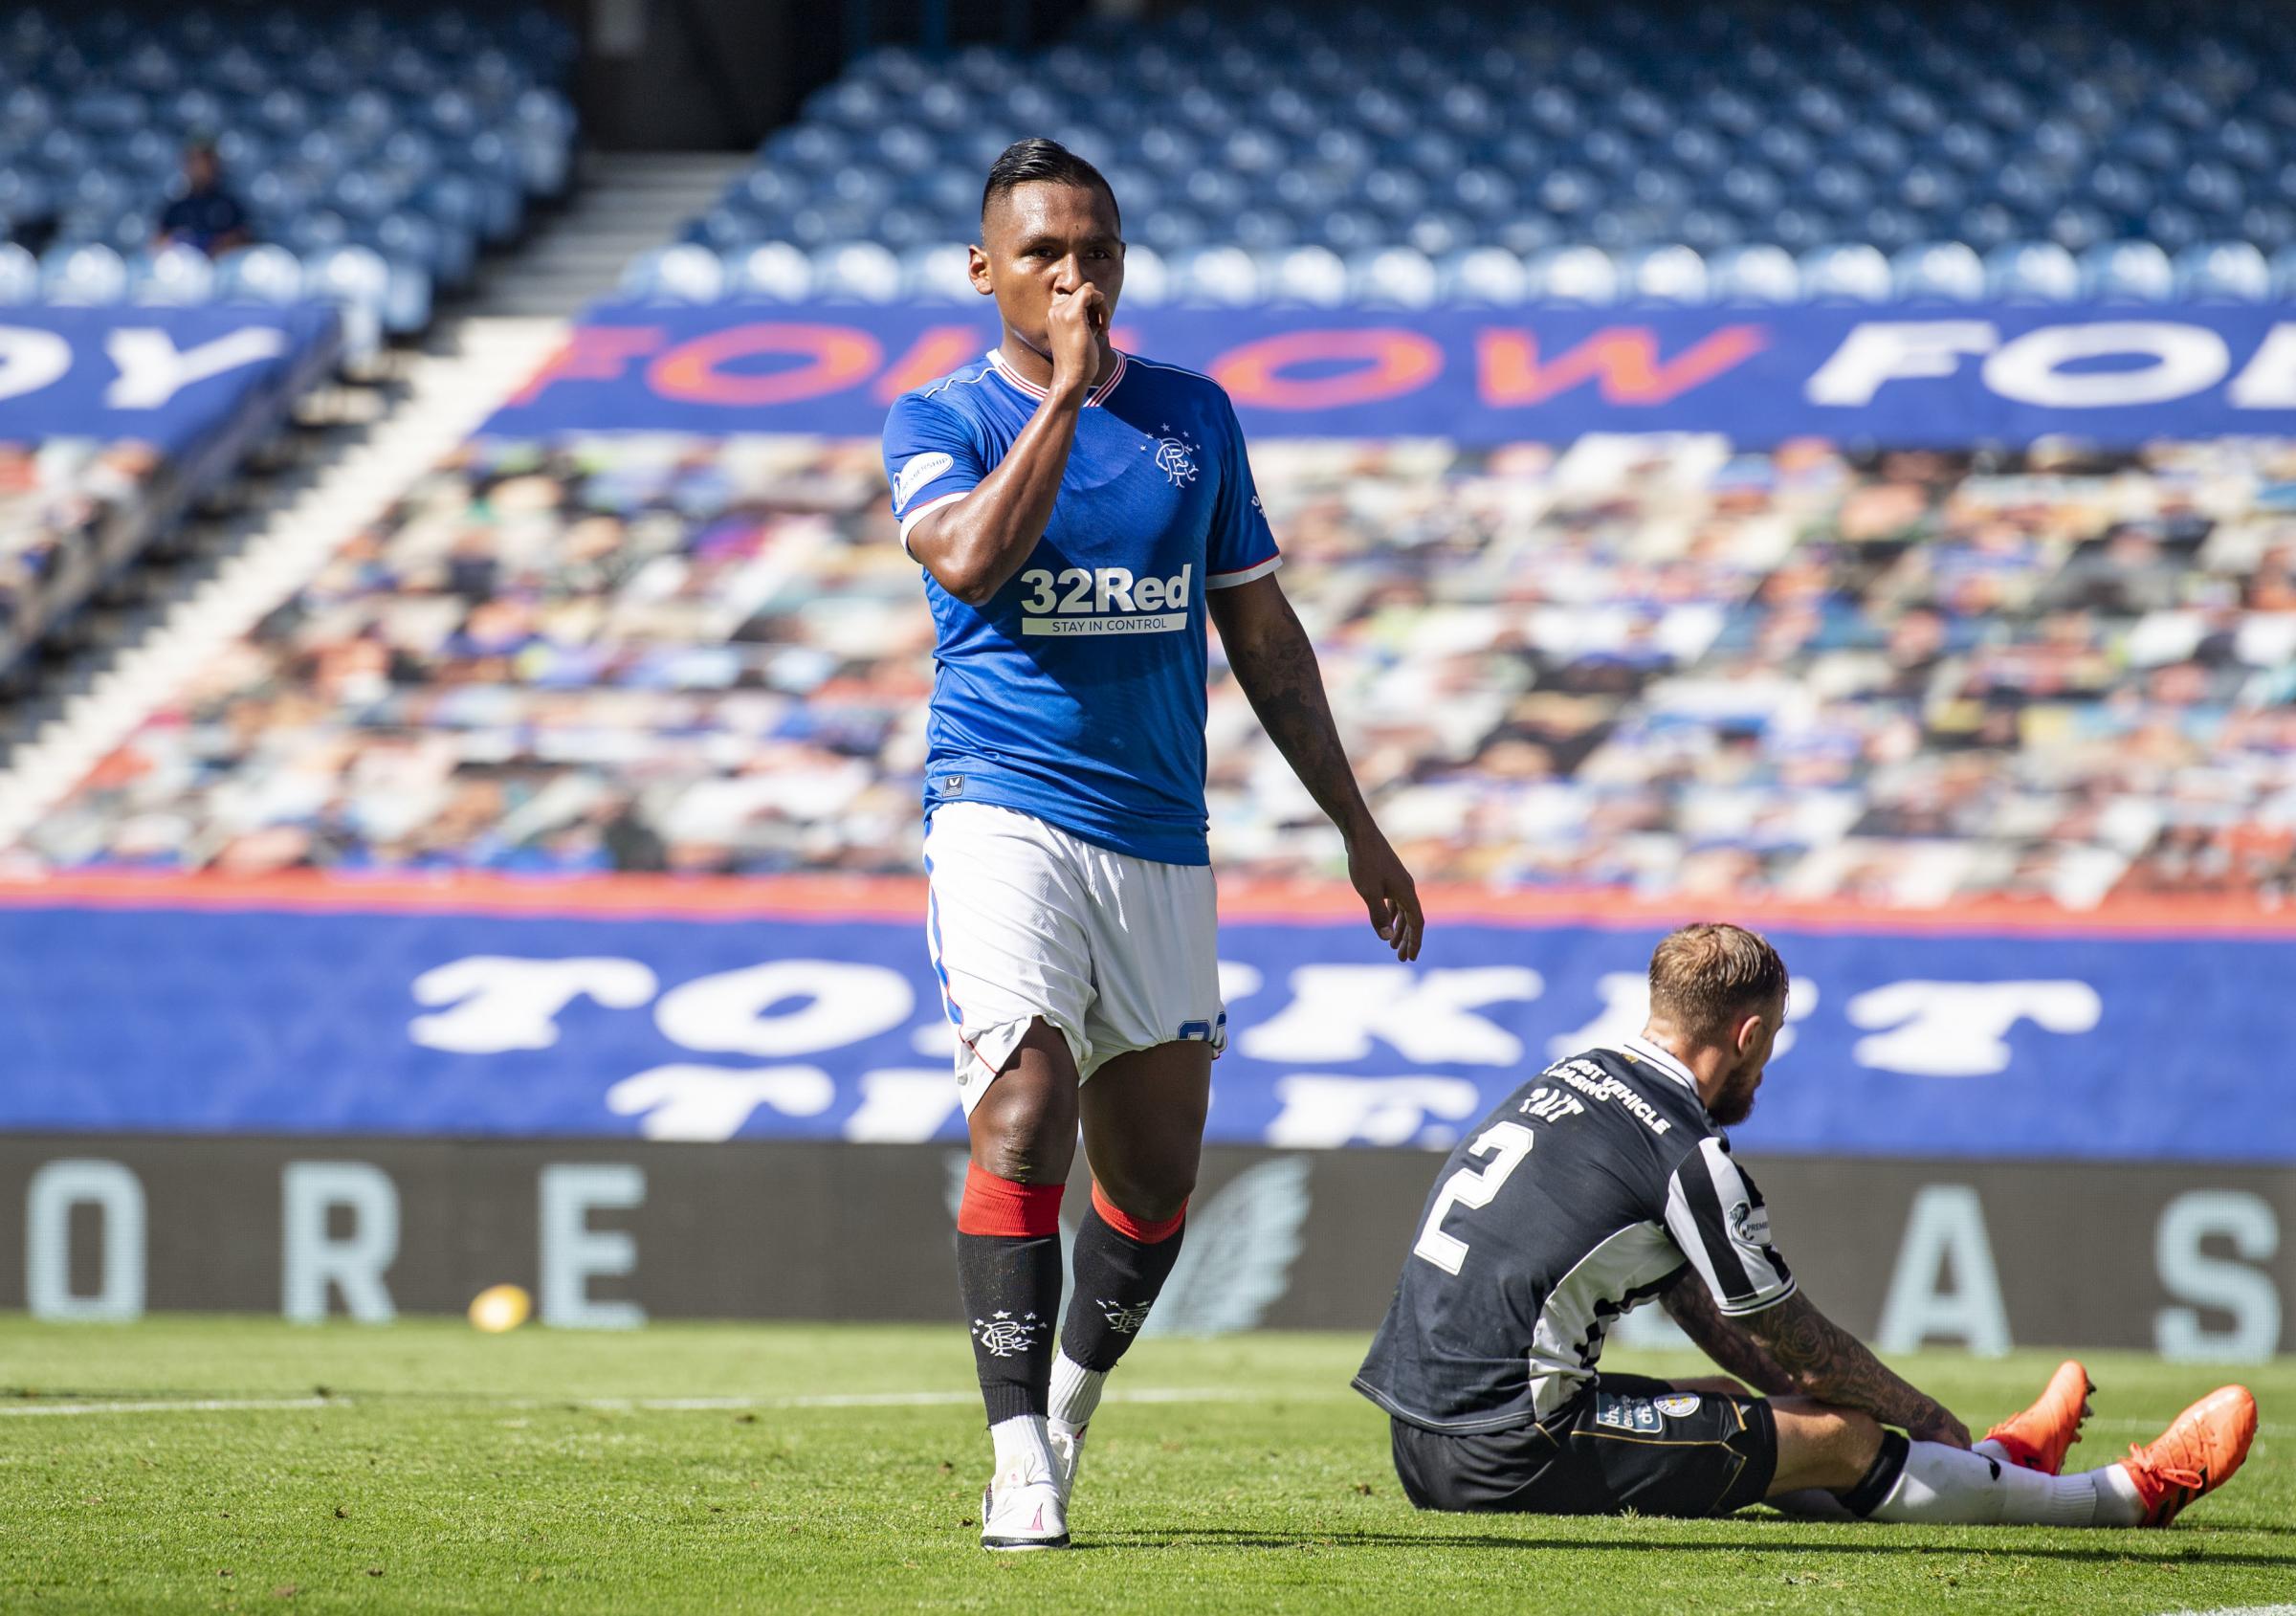 Rangers 1-0 Kilmarnock as it happens: Kemar Roofe off the mark at Ibrox in first start